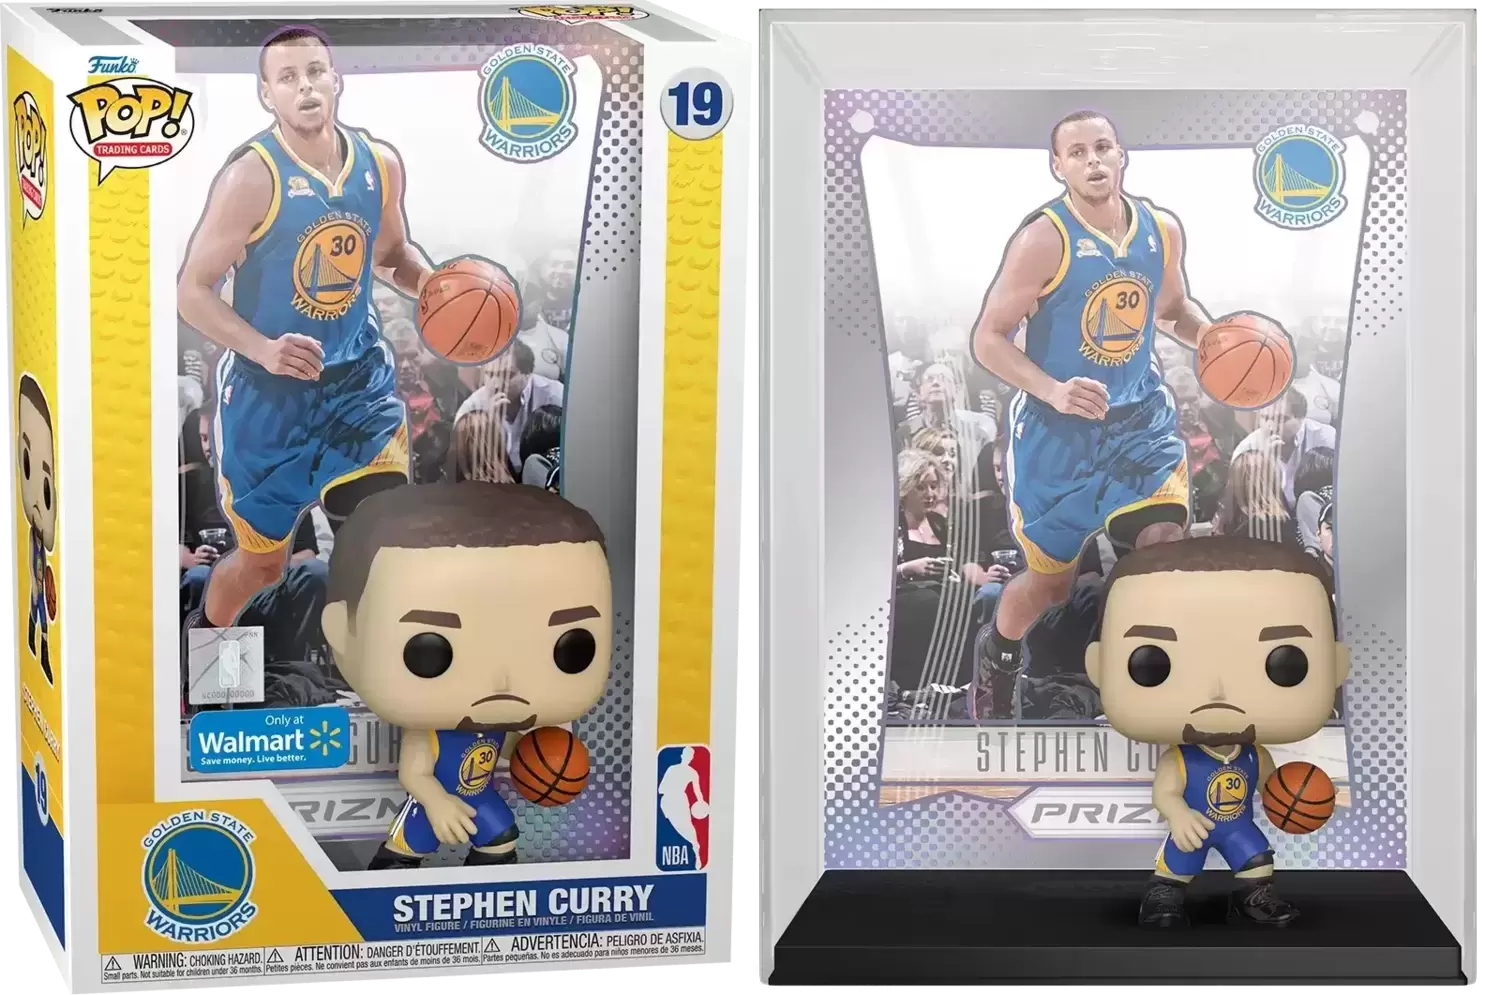 Buy Popsies Stephen Curry at Funko.